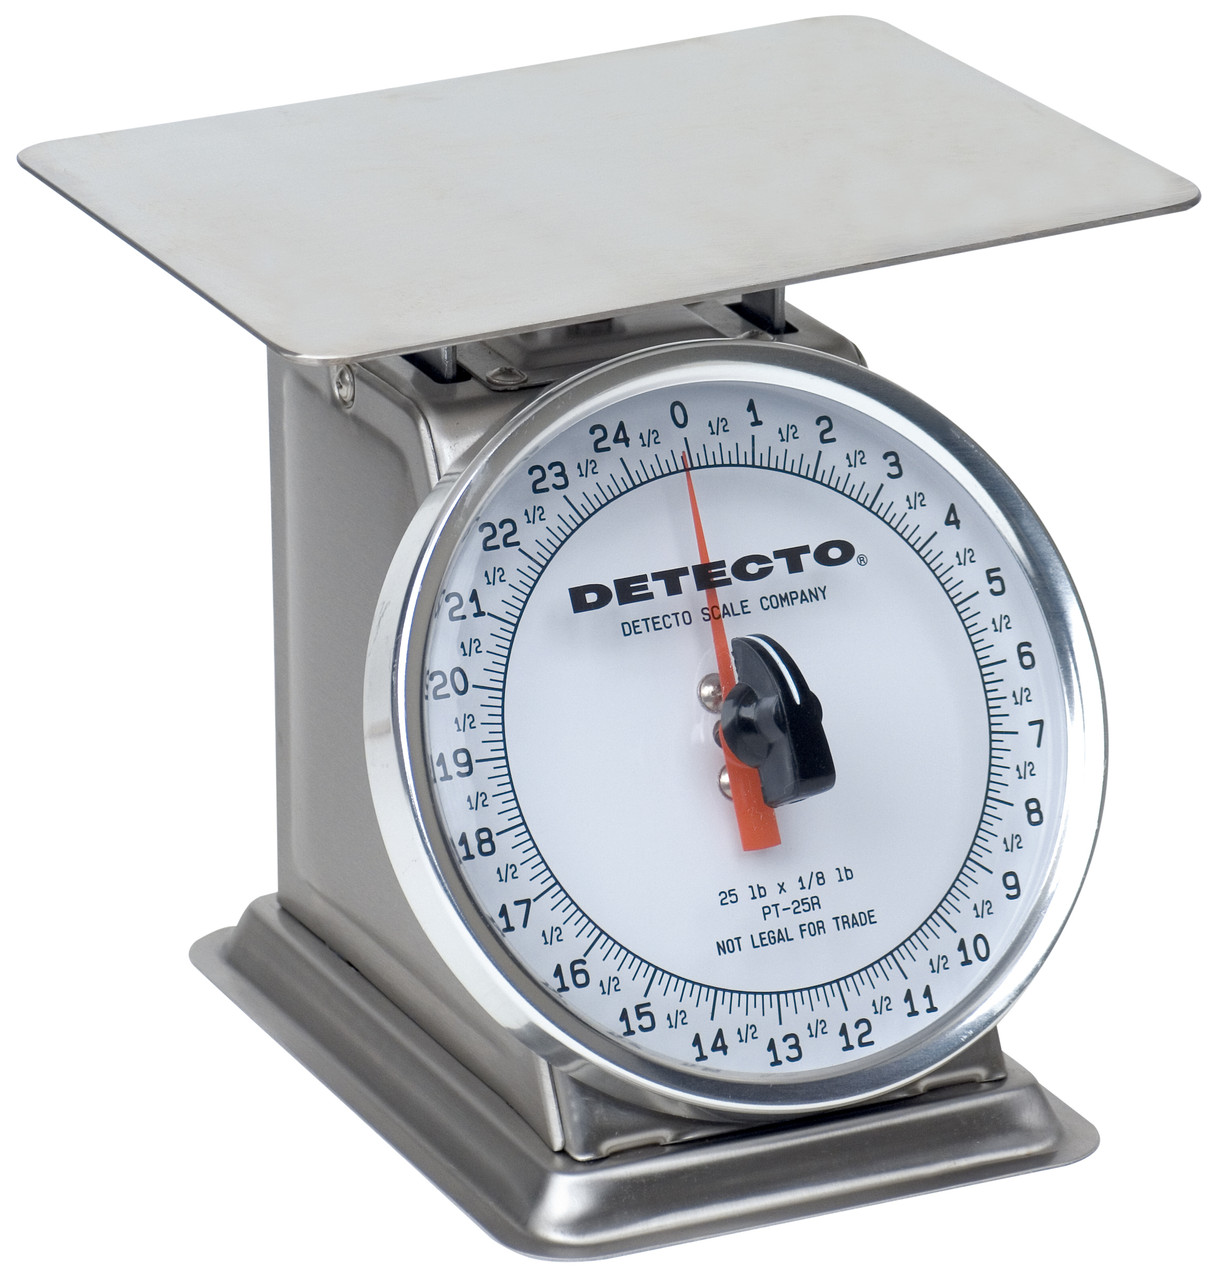 Cardinal Detecto 25 Lb Top Load Rotating Dial Scale 7.875" x 5.875" Stainless Steel, Model# PT-25-SR